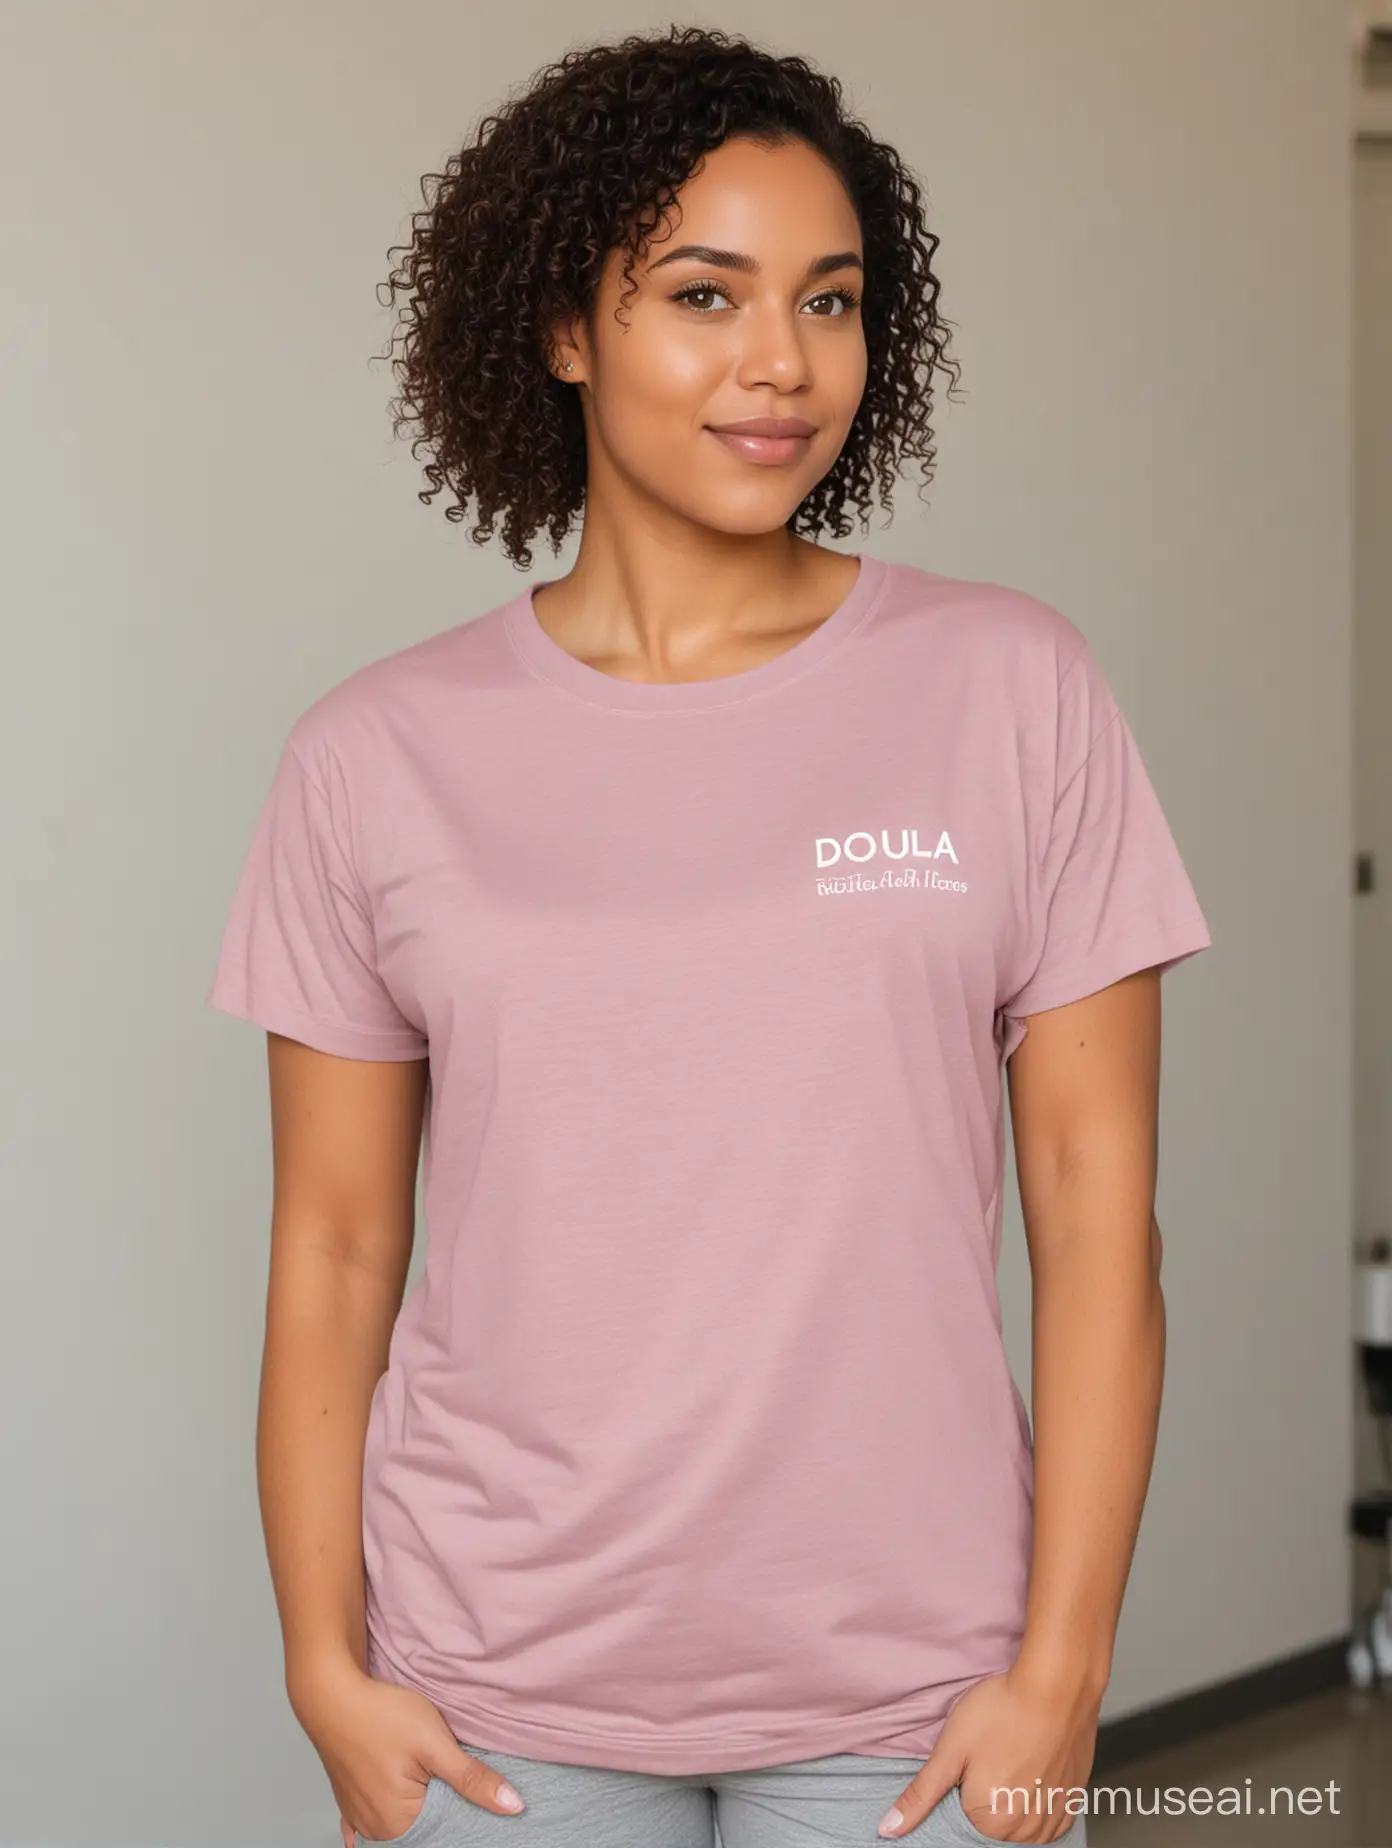 A doula nurse model standing in a hospital wearing a plain Bella+Canvas 3001 Heather Mauve round neck plain tshirt with no pockets